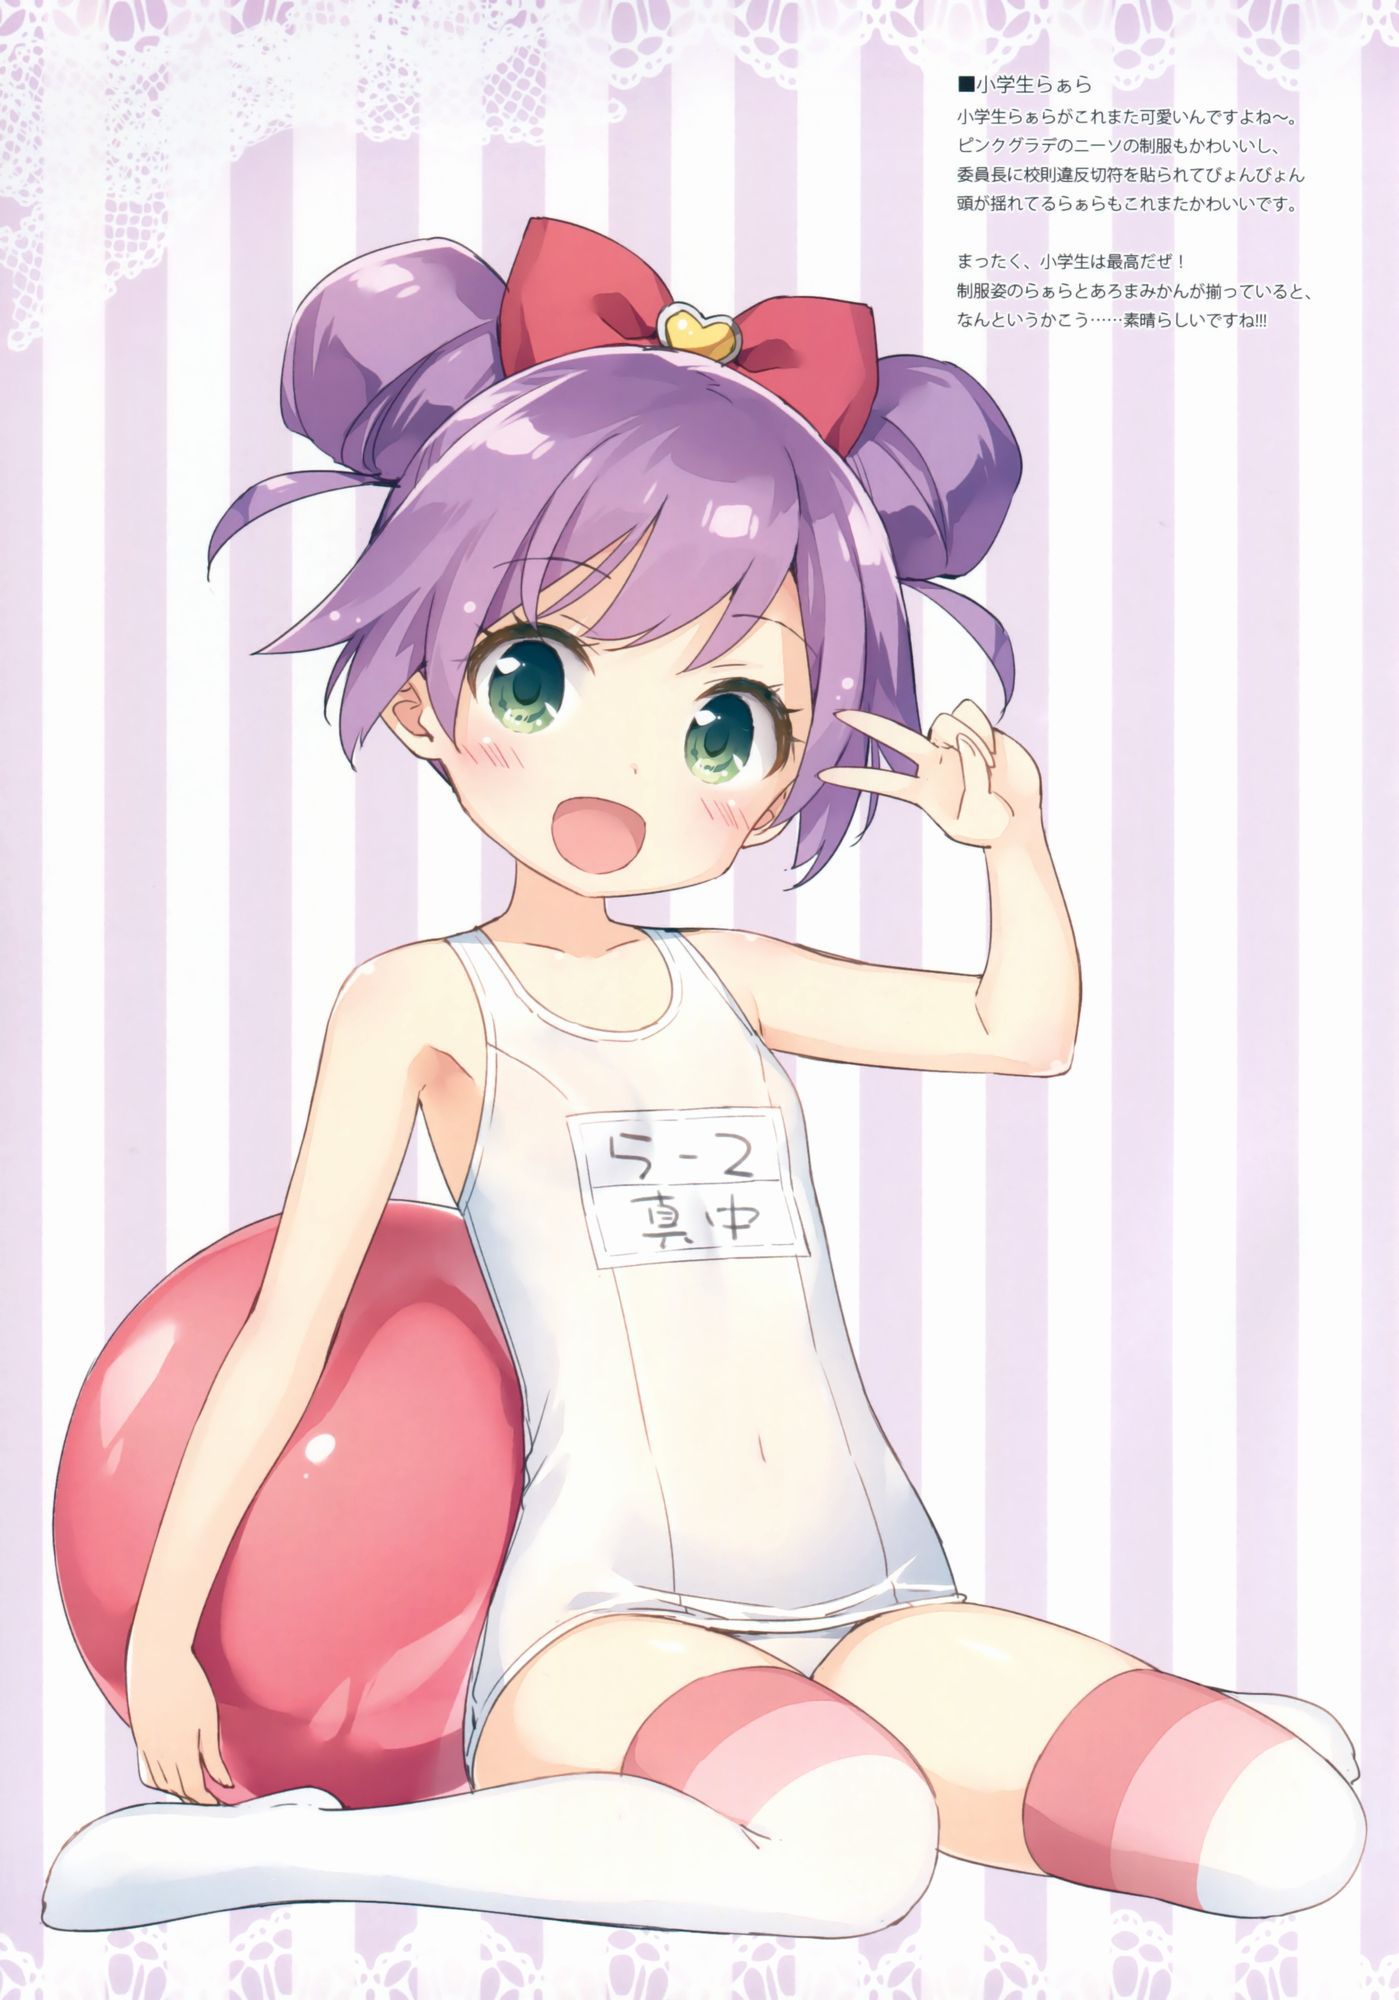 Swimsuit I want to see the image of swimsuit I'm a lewd I'm I'm that cloth area 10